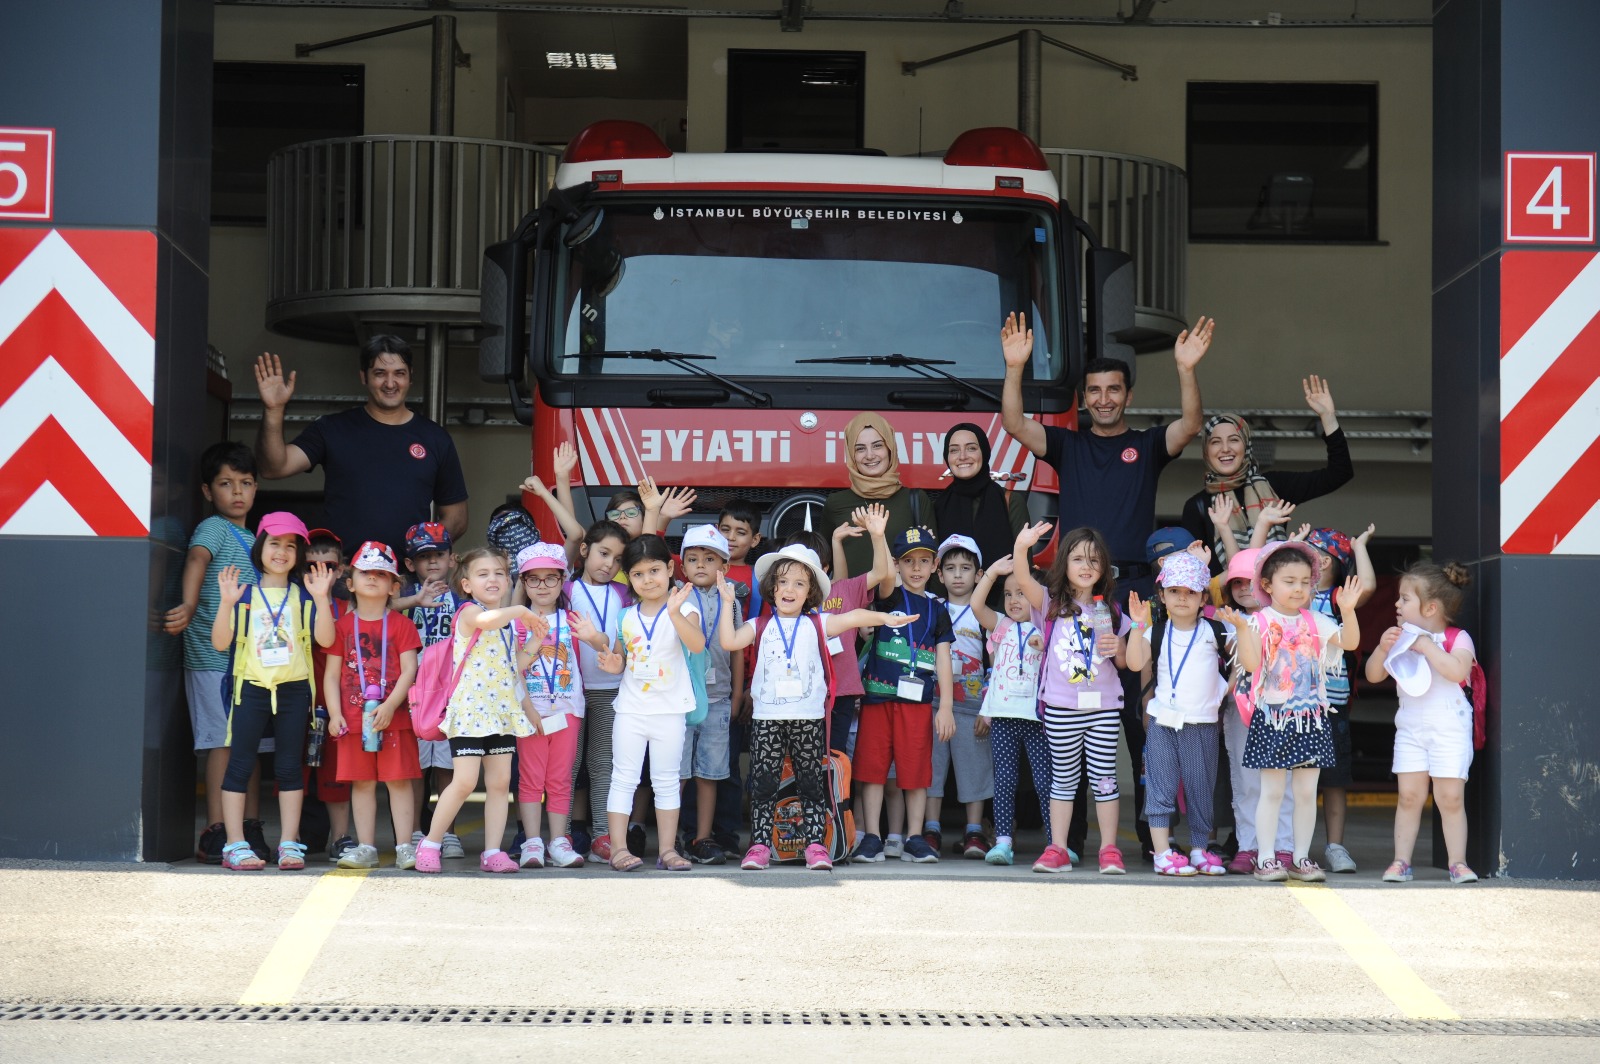 Visit by little kids - News - Istanbul Fire Department